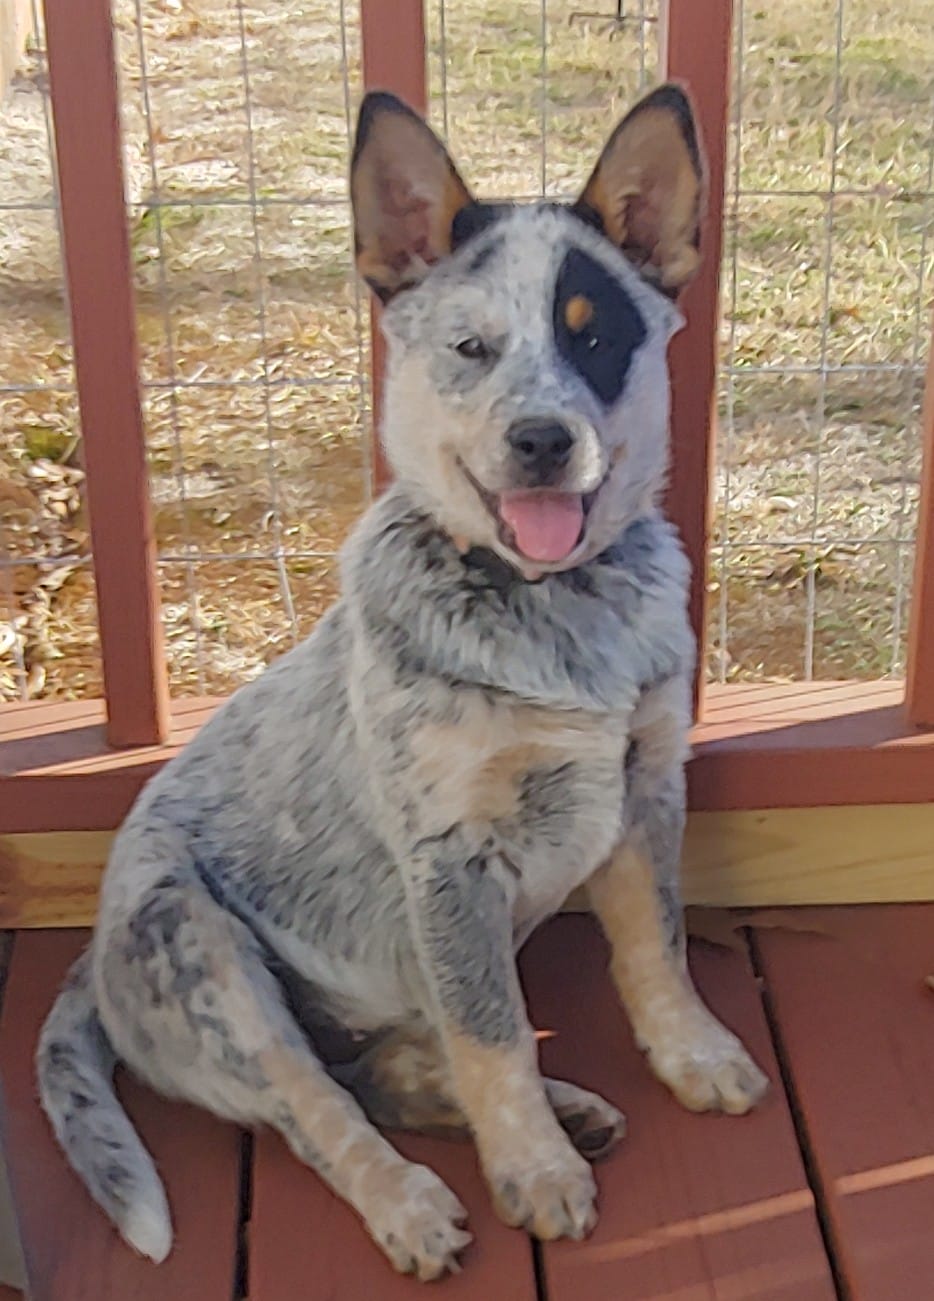 Australian Cattle Dogs for sale in Camden  South Carolina, Golden Retriever puppies for sale in Camden South Carolina, Miniature Schnauzer puppies for sale in Camden South Carolina, Puppies for sale in Camden South Carolina, AKC puppies for sale in Camden South Carolina